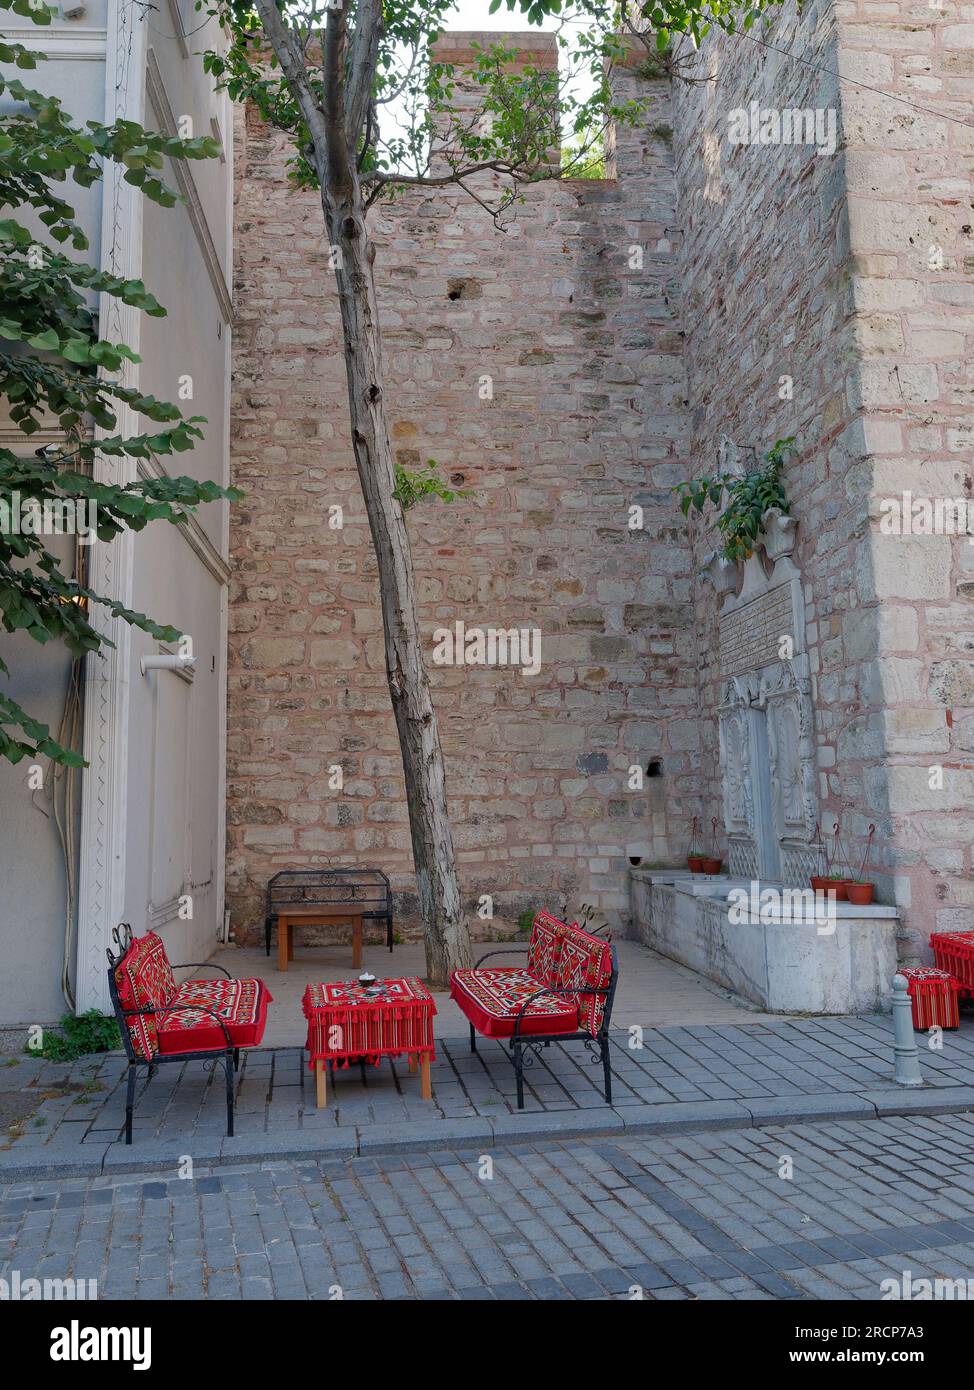 Red fabric table and chairs ready for turkish tea to be served, beside a stone built castle like wall with battlements atop Stock Photo